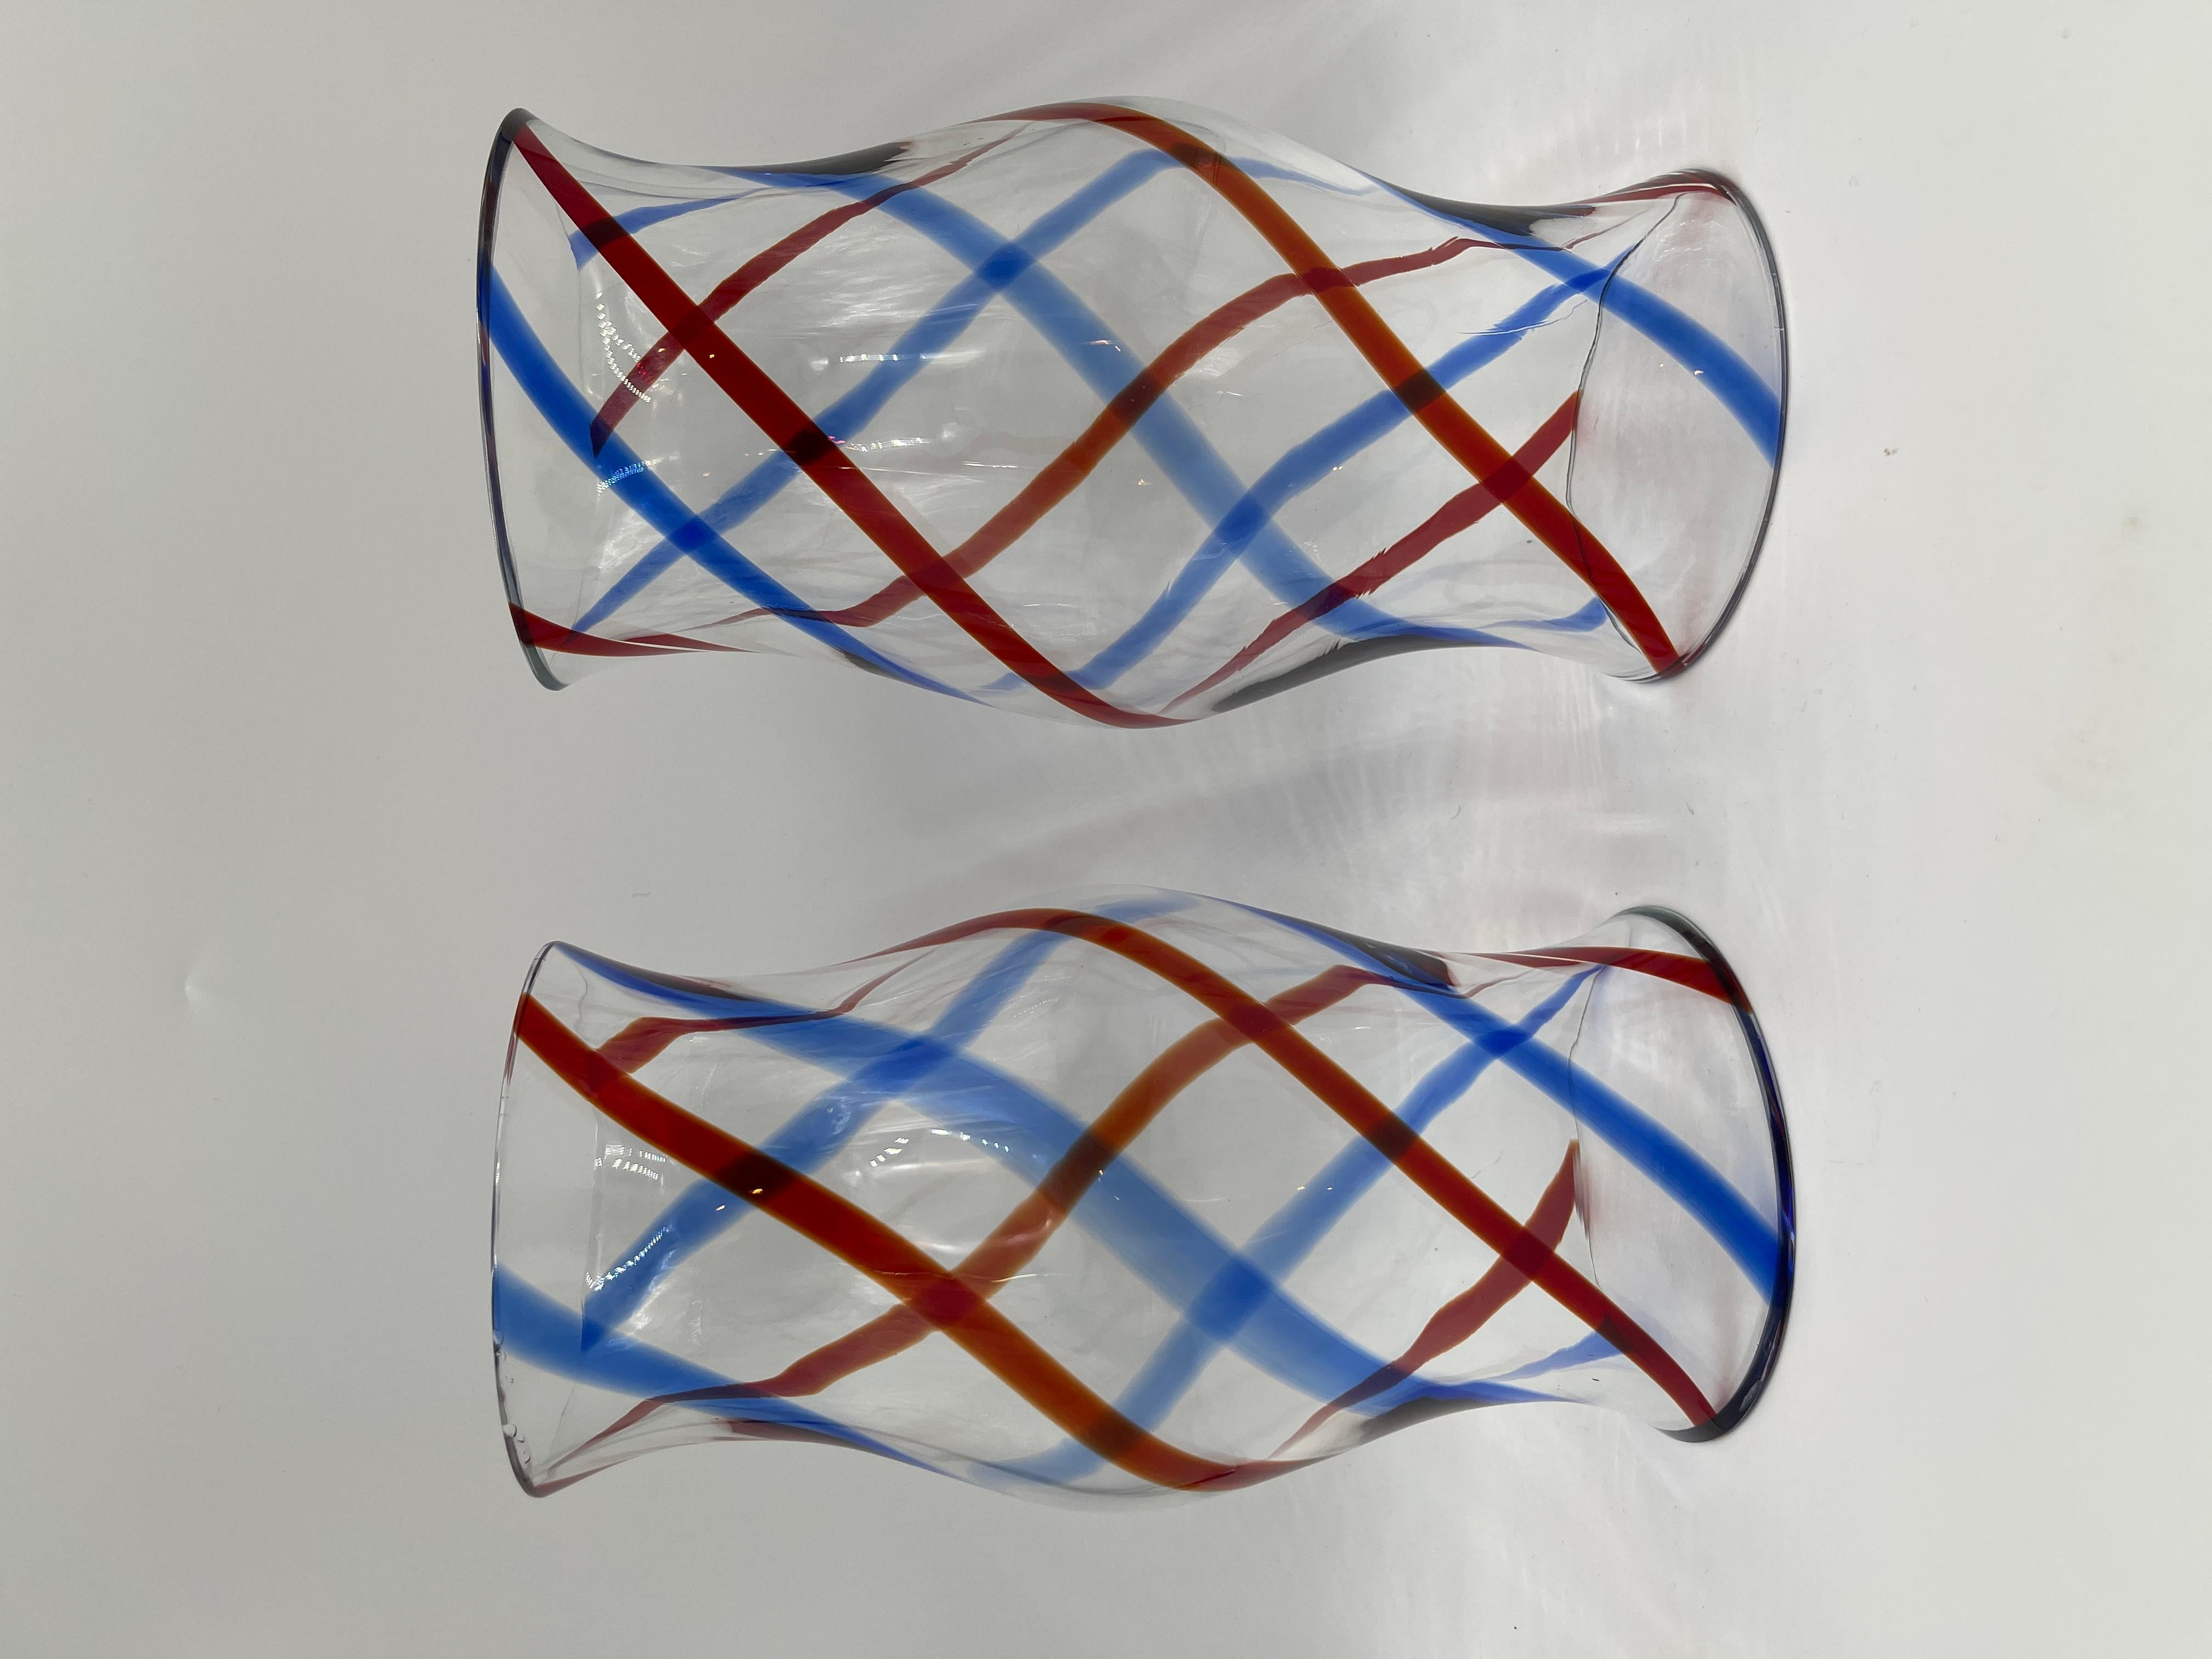 Pair of striking mid-century Venetian glass hurricane shades. Baluster form with red and blue spiral decoration. A gorgeous addition to any table, sideboard or fireplace mantle. Fresh from a New York City estate.